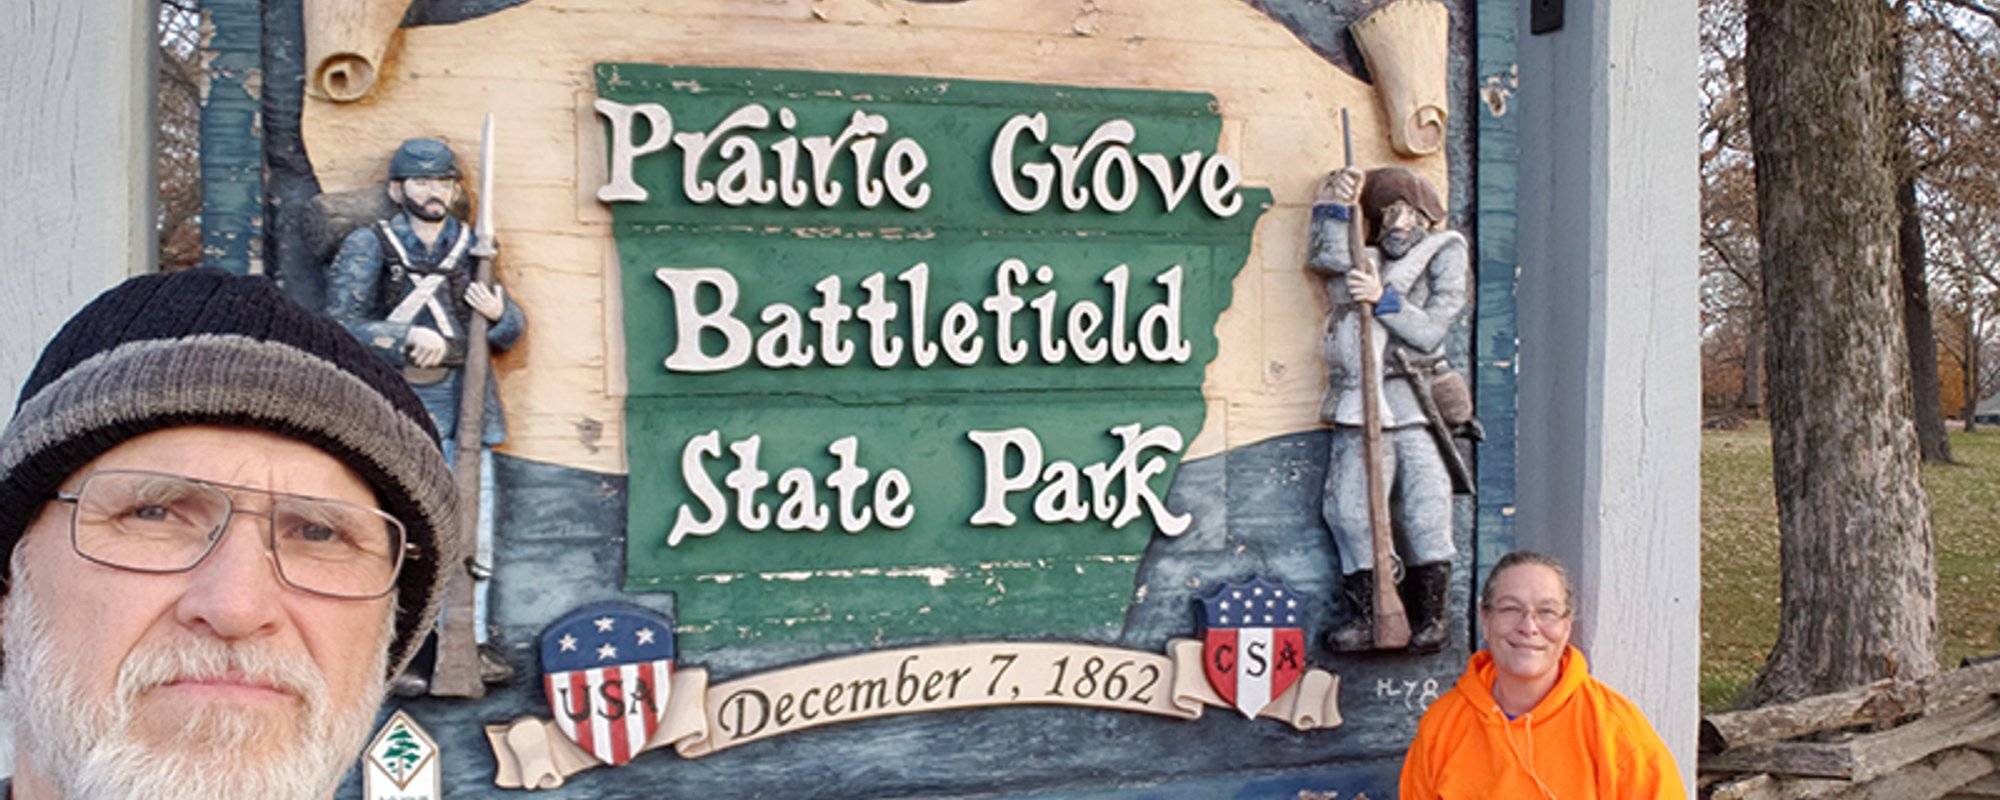 Visiting the Past - Prairie Grove Battlefield State Park